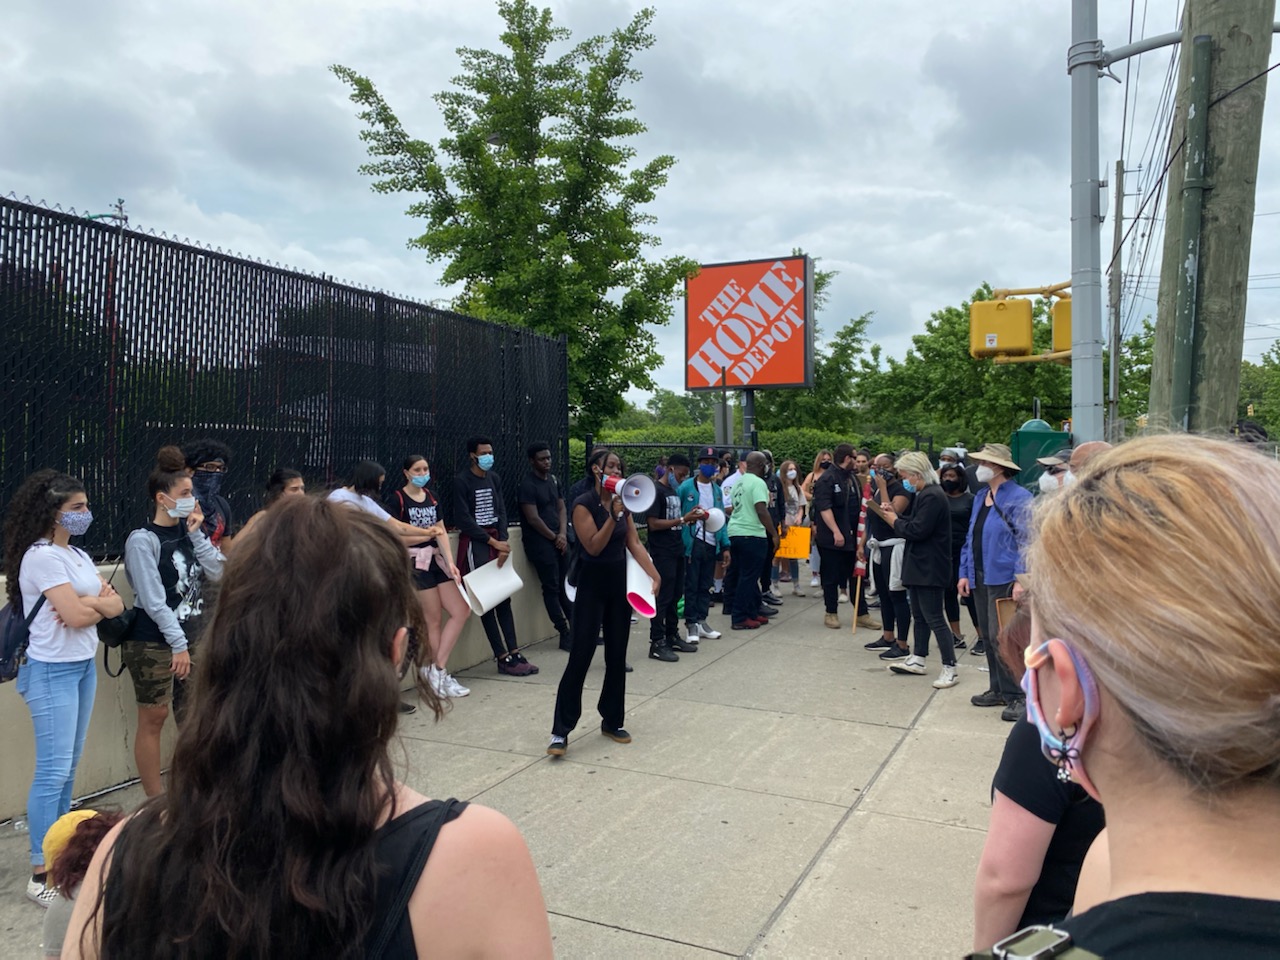 Protesters are gathering at the Home depot in Concord. (Staten Island Advance/Jordan Hafizi)